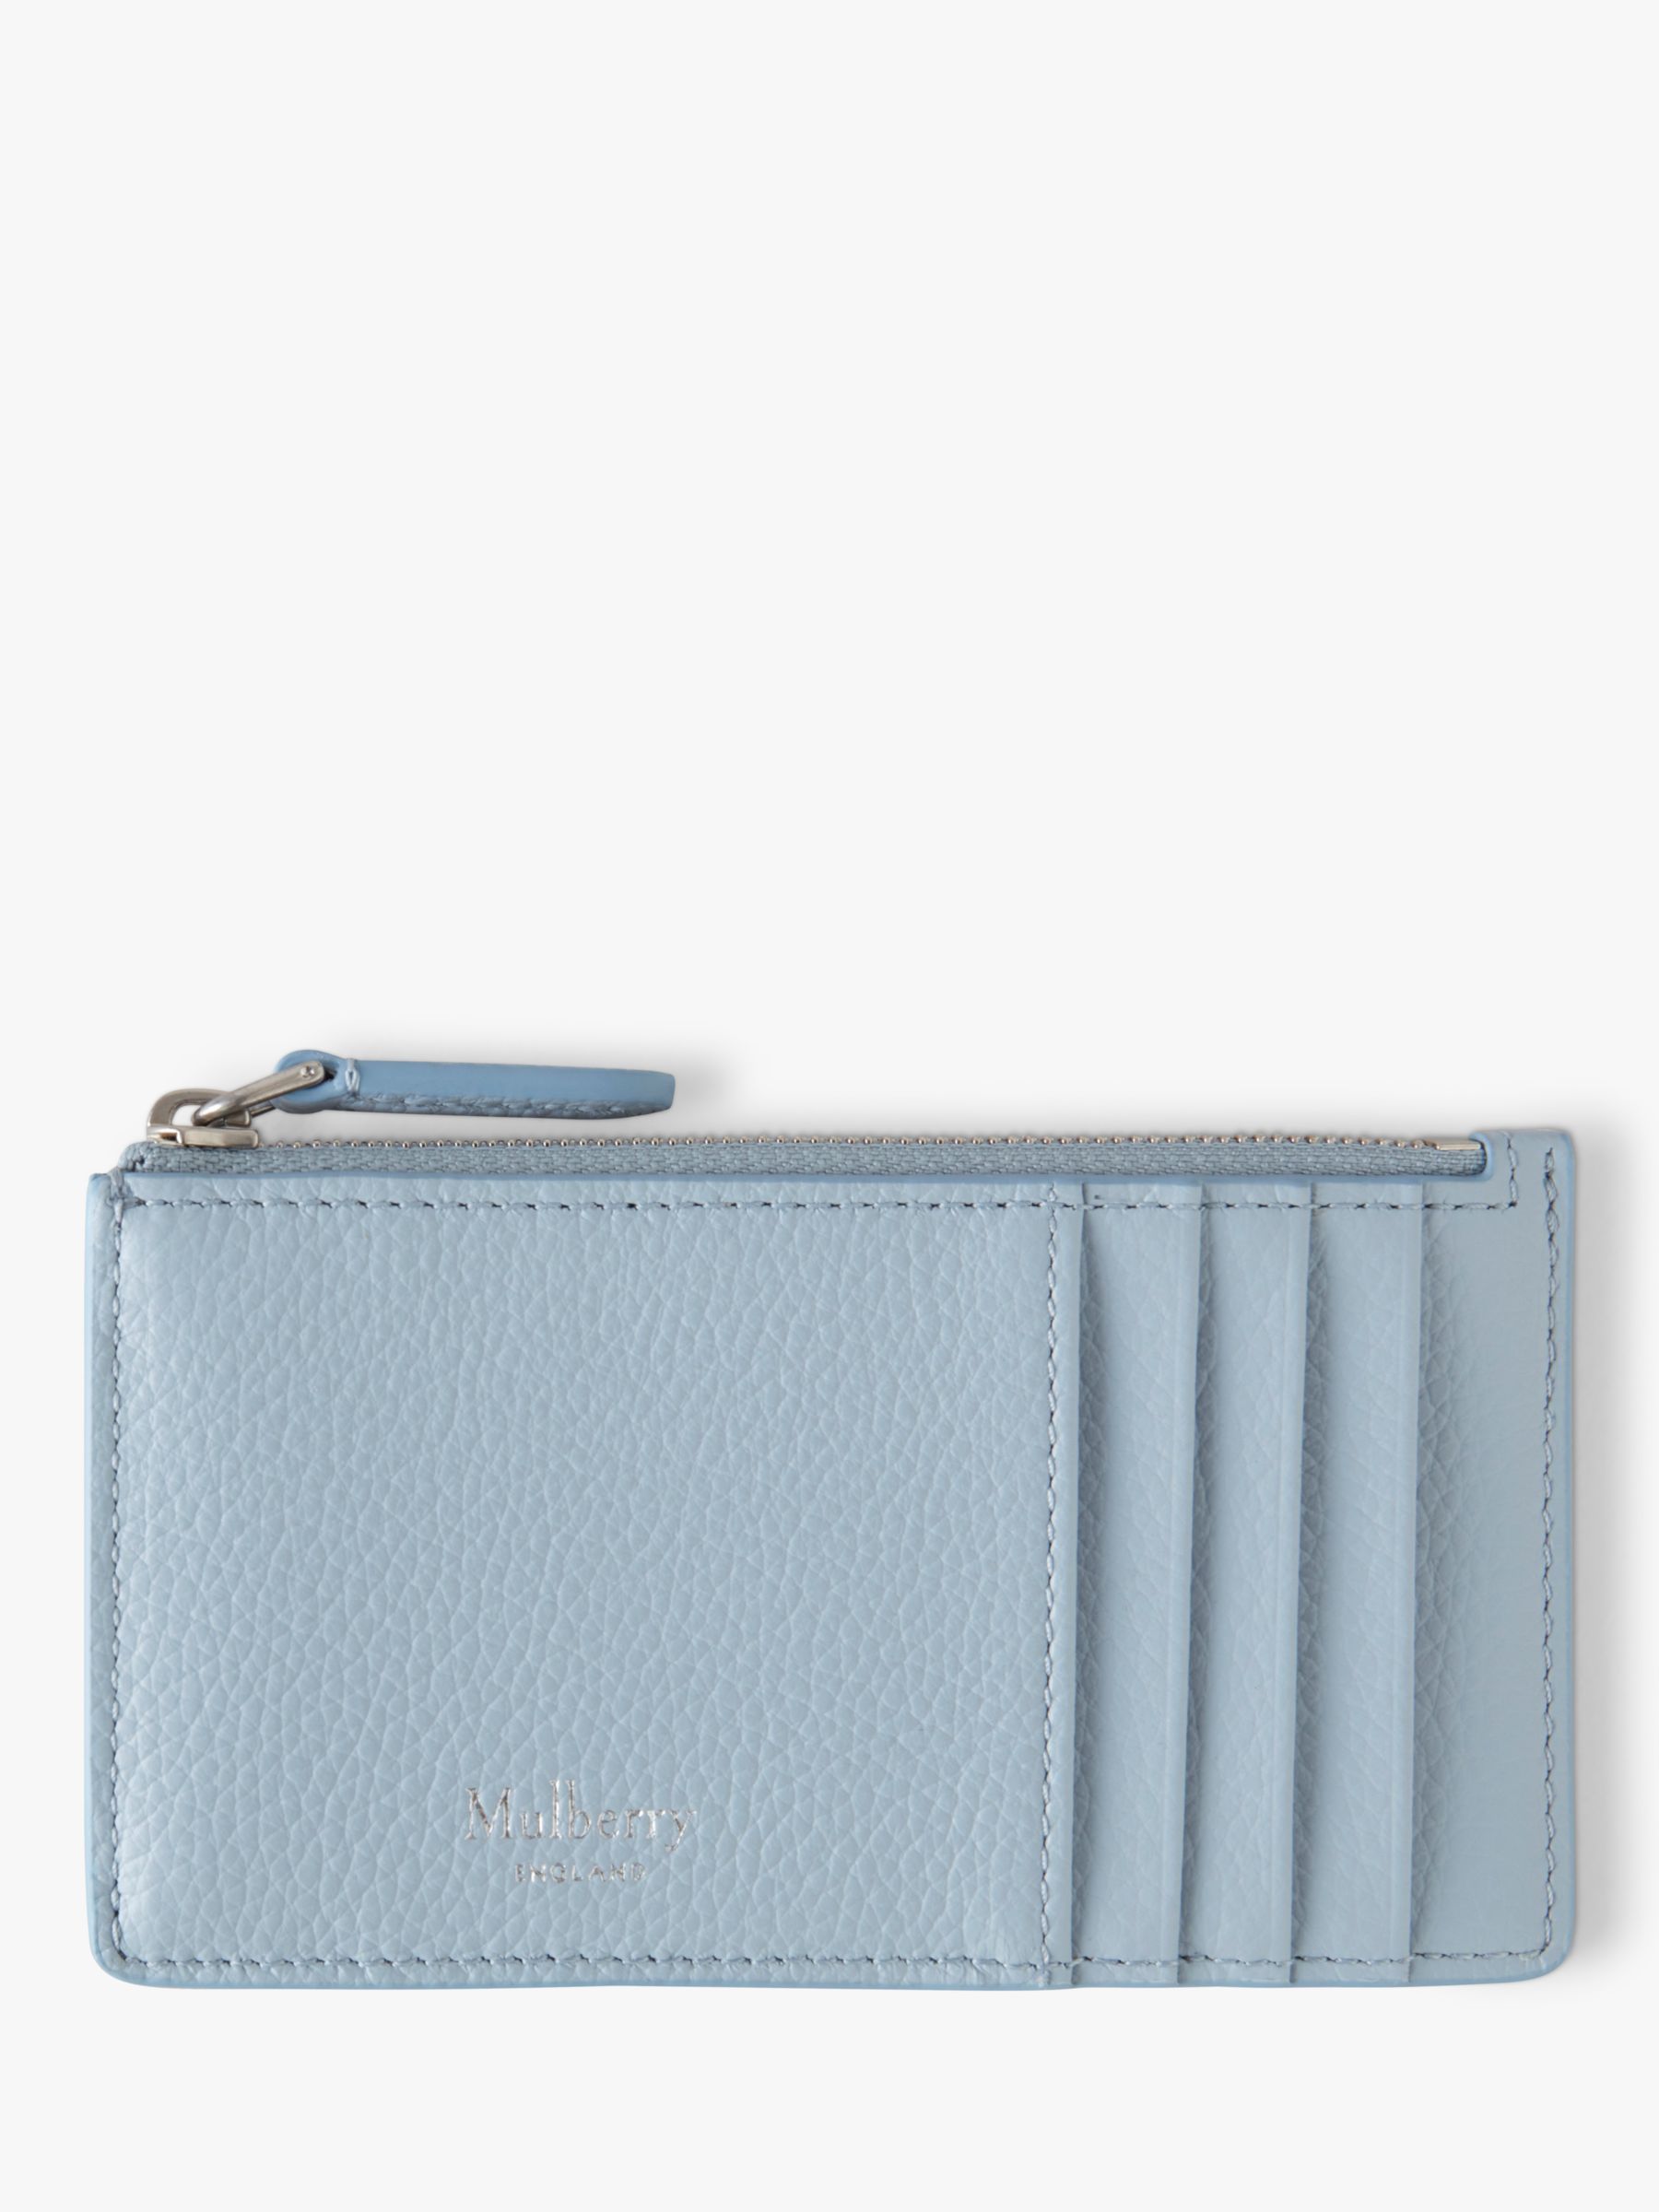 Mulberry Small Classic Grain Leather Continental Zipped Long Card ...